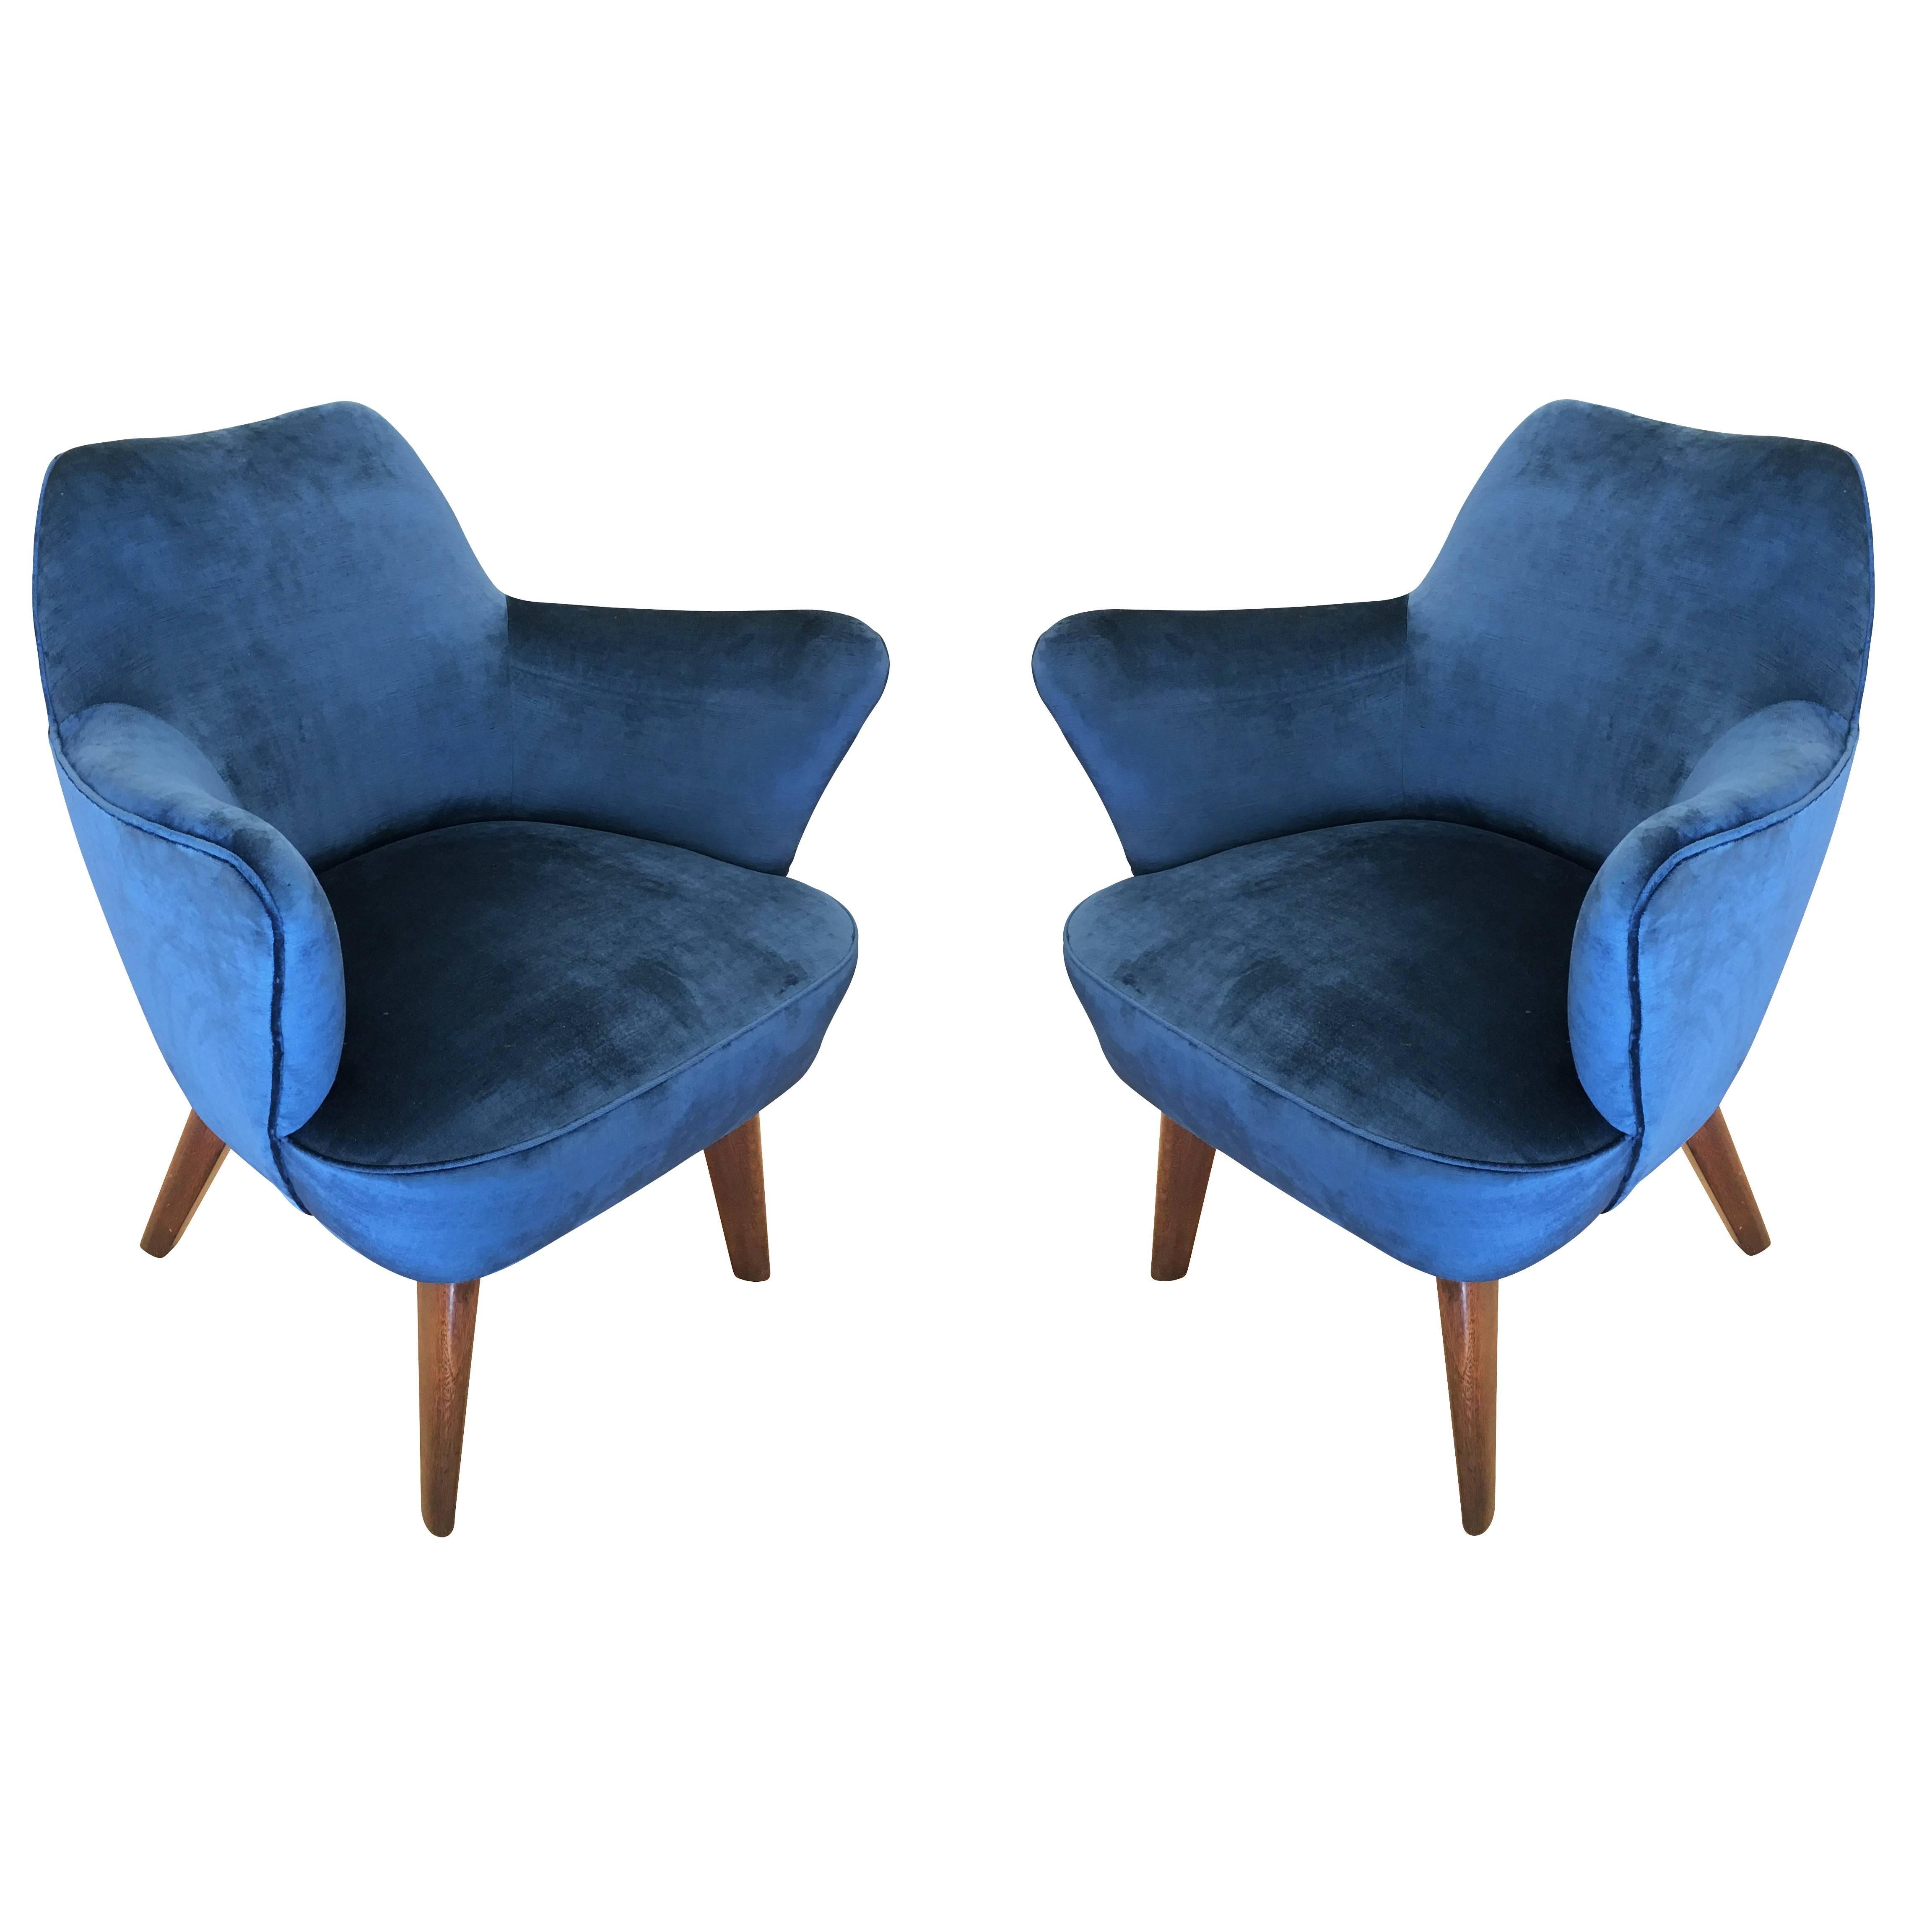 Rare 1950's Gio Ponti armchair made by Cassina in limited quantities for the Augustus Ocean Liner. Comes with the expertise from the Gio Ponti archives. Upholstered in a dark blue velvet and the legs are walnut. 

Condition: Restored and recently